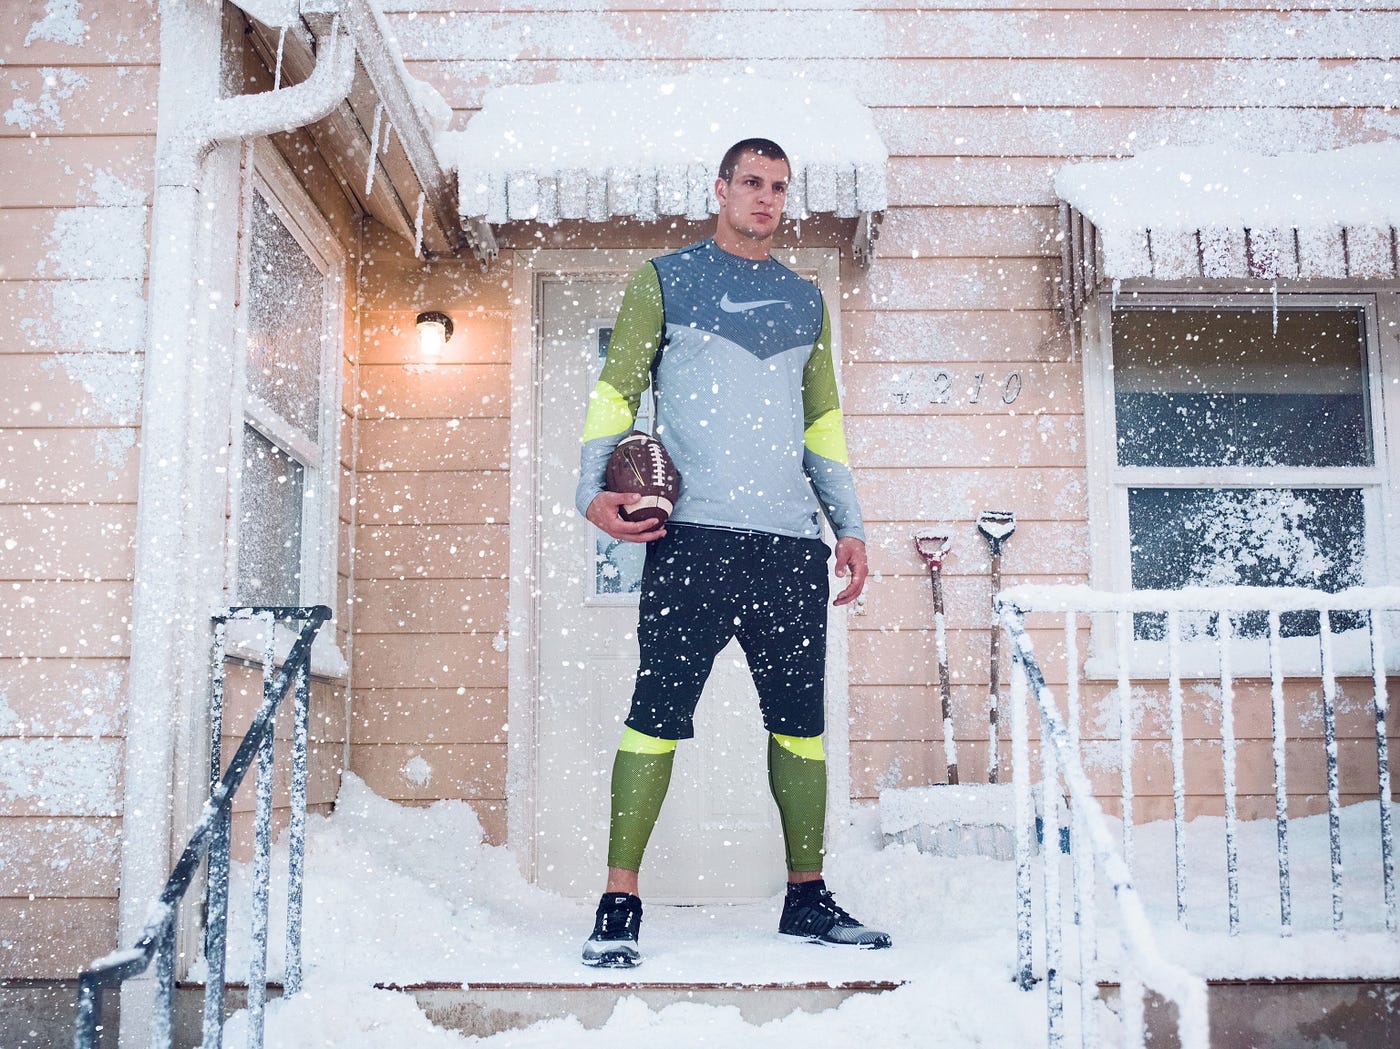 Snow Day. Nike may have released their best Ad… | by Tim Zalinski | Medium